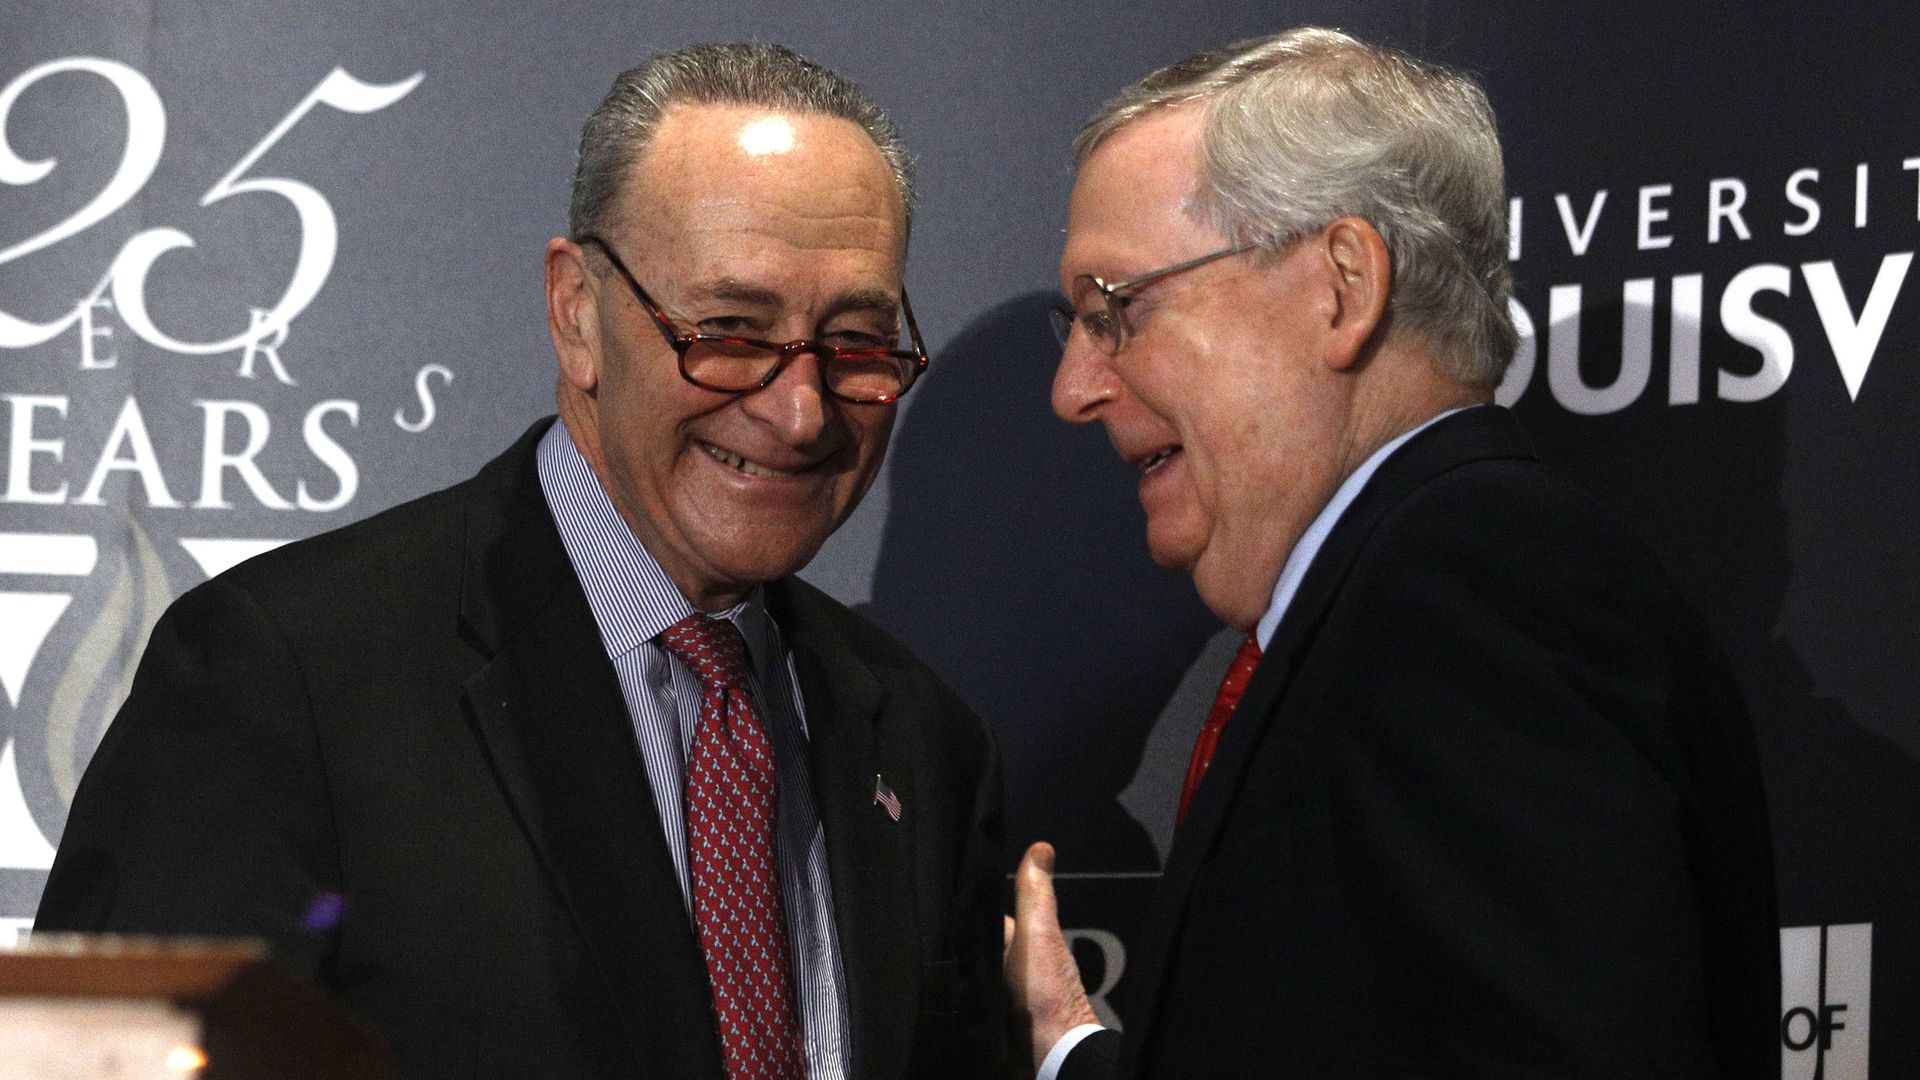 Mitch McConnell and Chuck Schumer smiling.